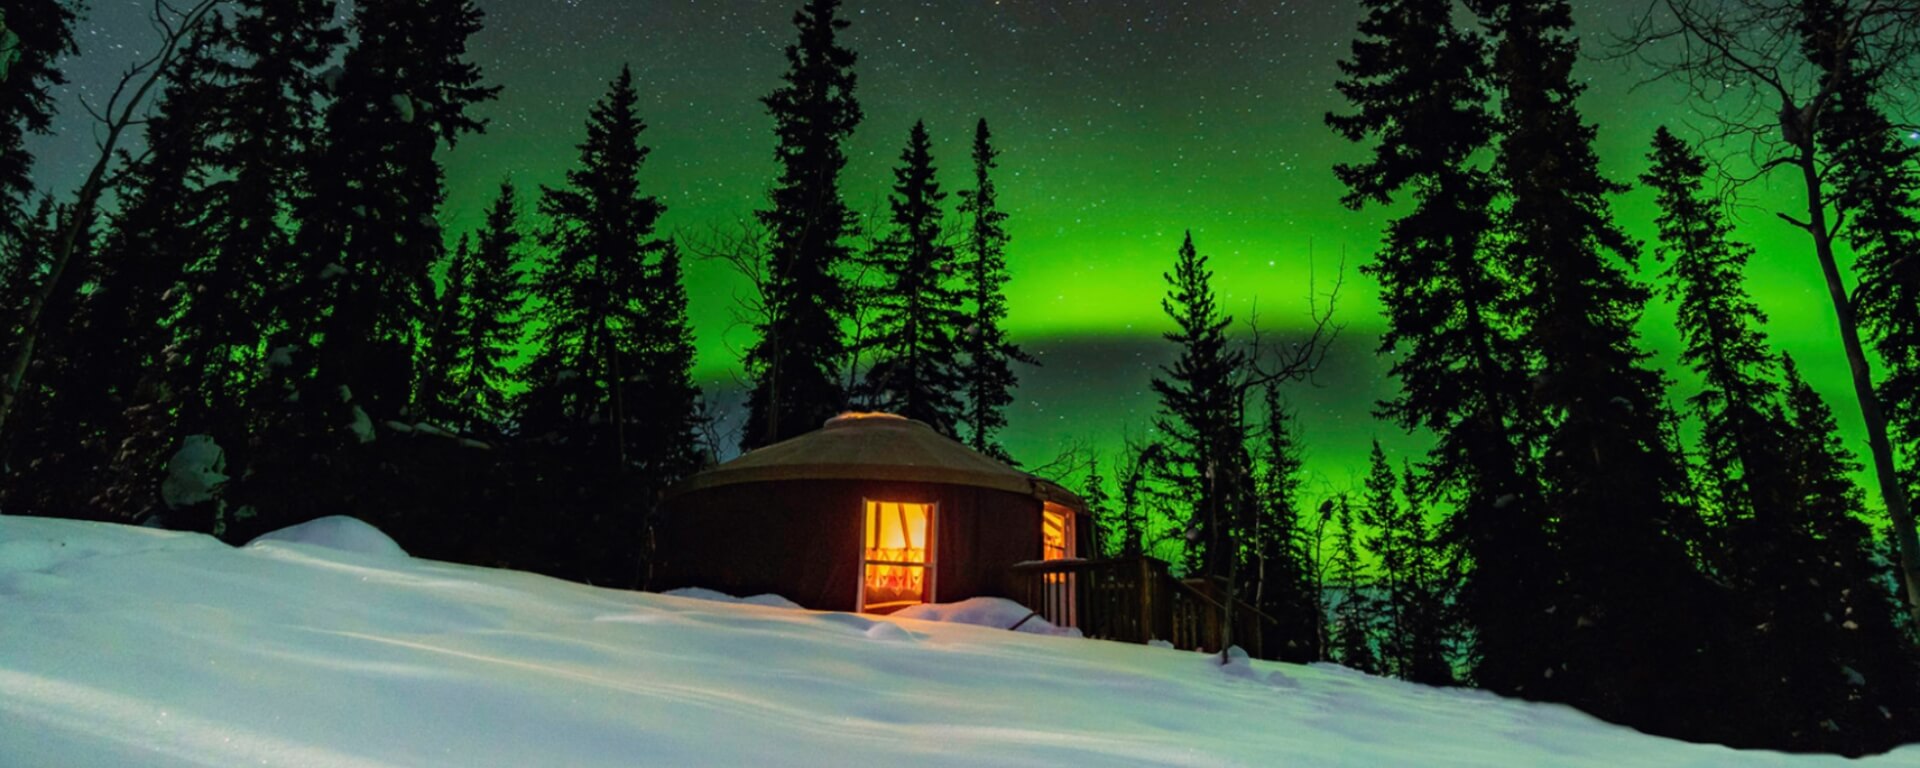 Roam Responsibly Under the Northern Lights